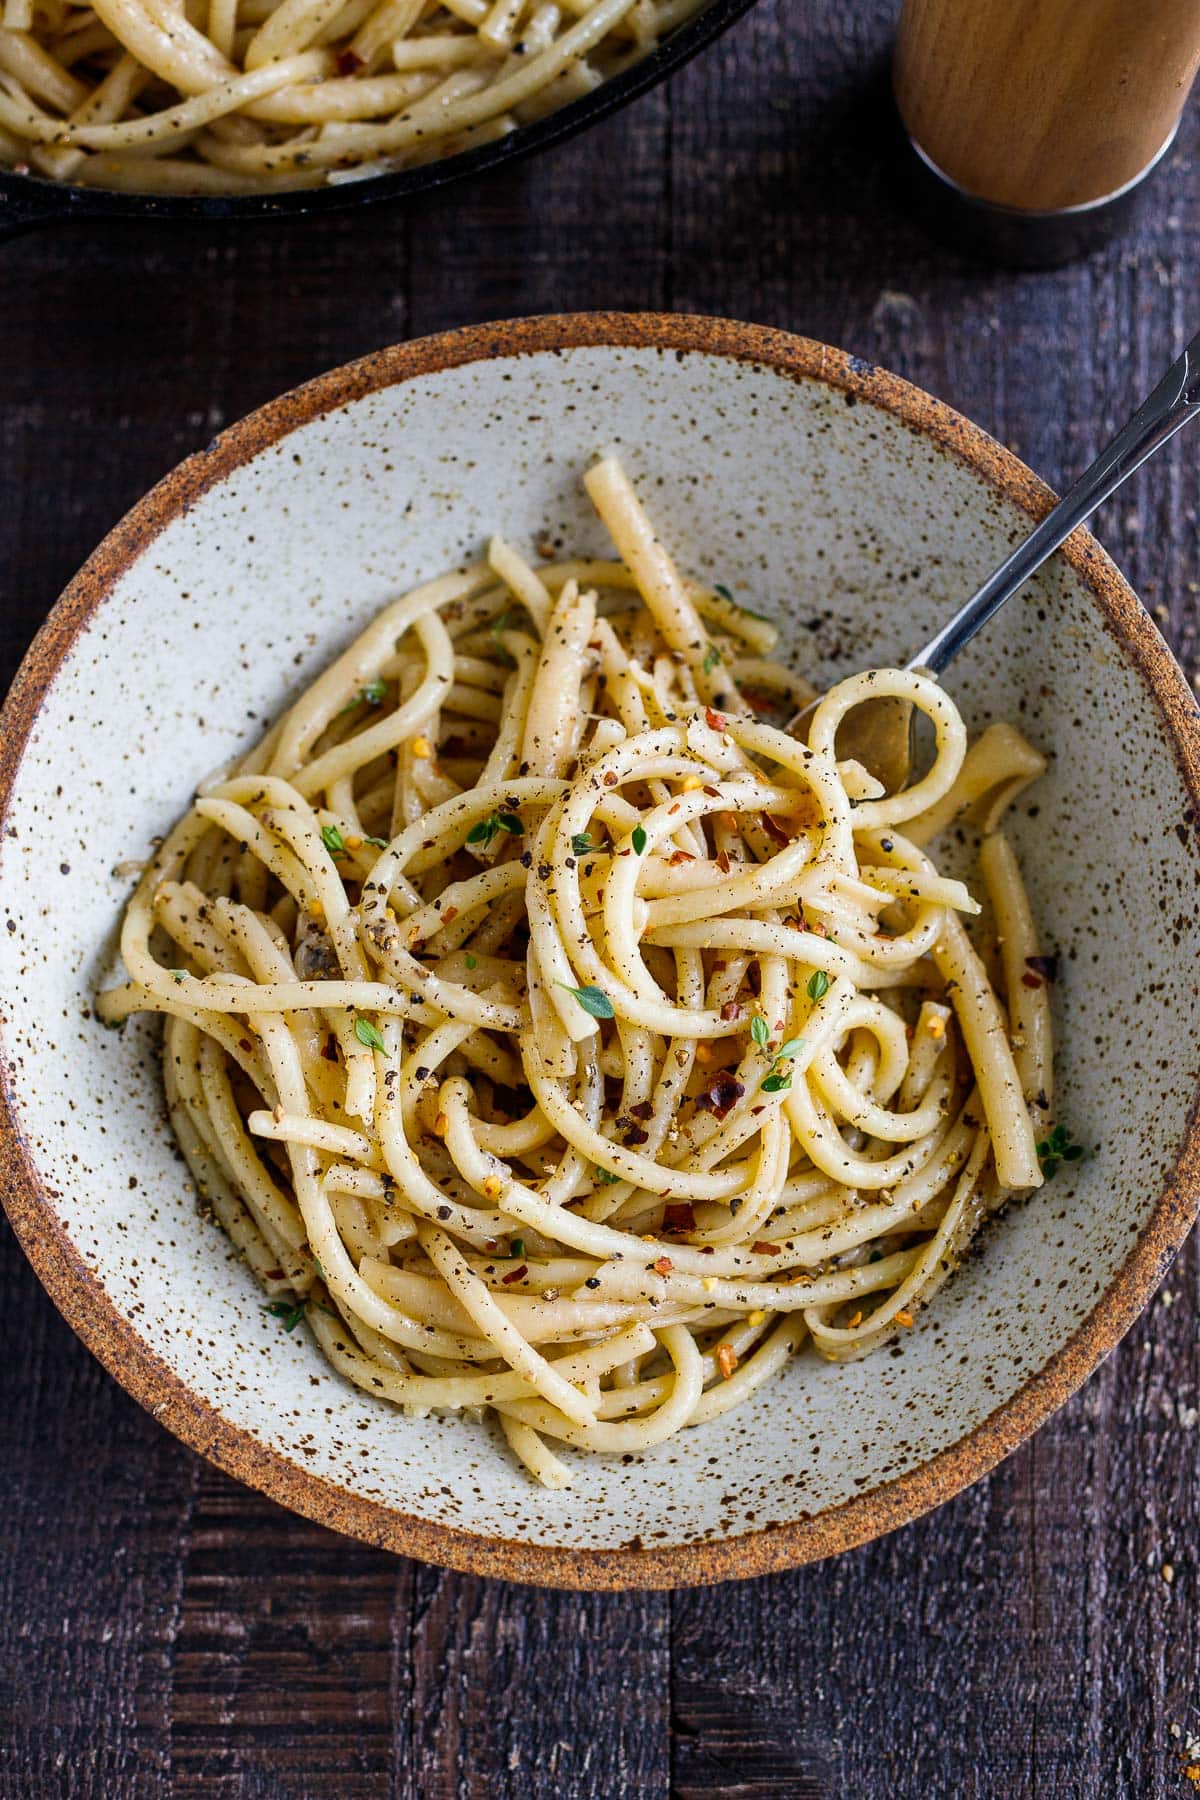 A simple, authentic recipe for Cacio e Pepe - a classic Roman pasta recipe with only 4 ingredients, that can be made in 20 minutes flat. 